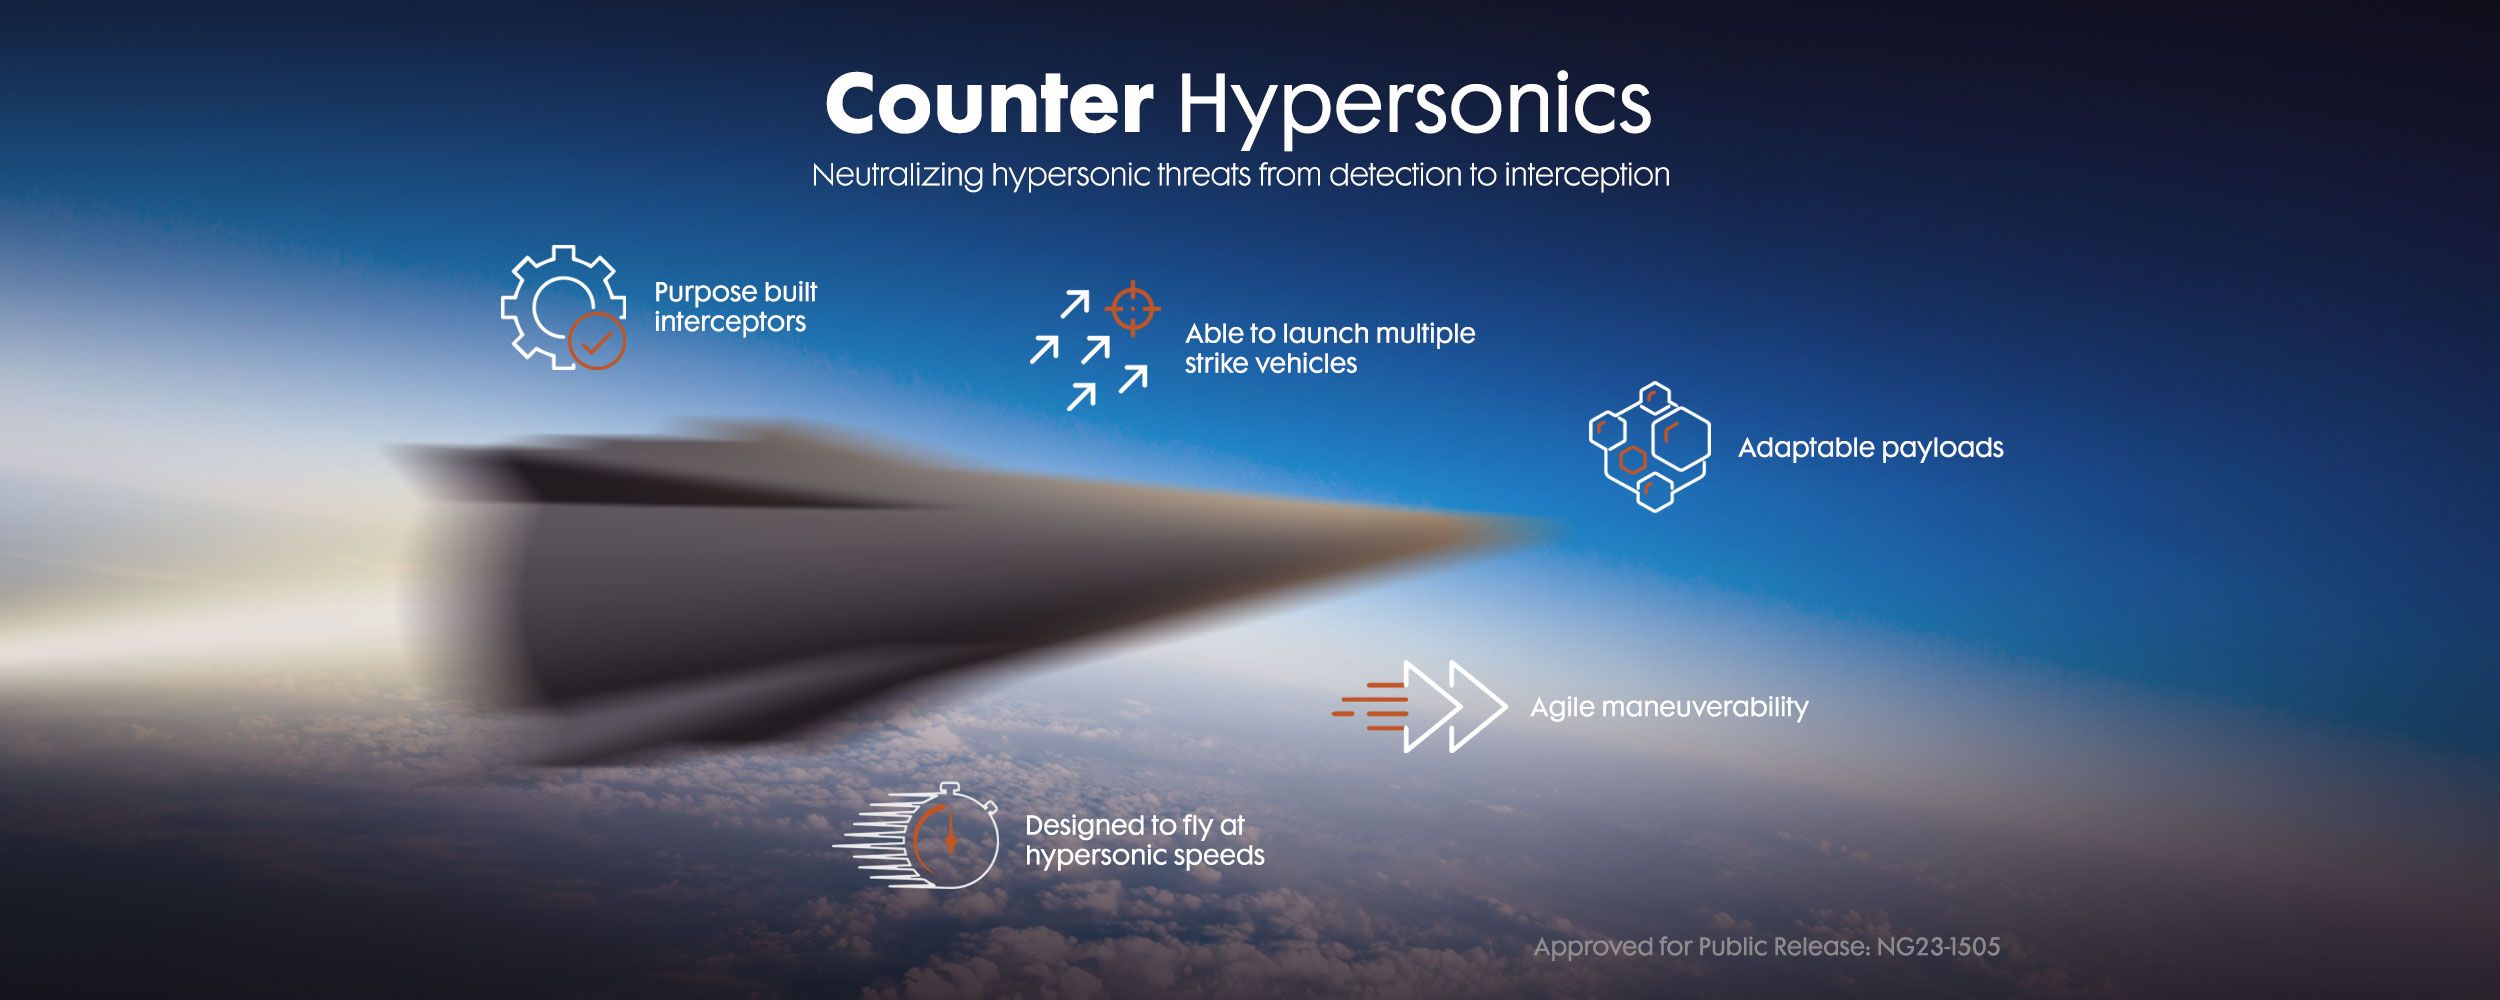 Counter Hypersonics infographic